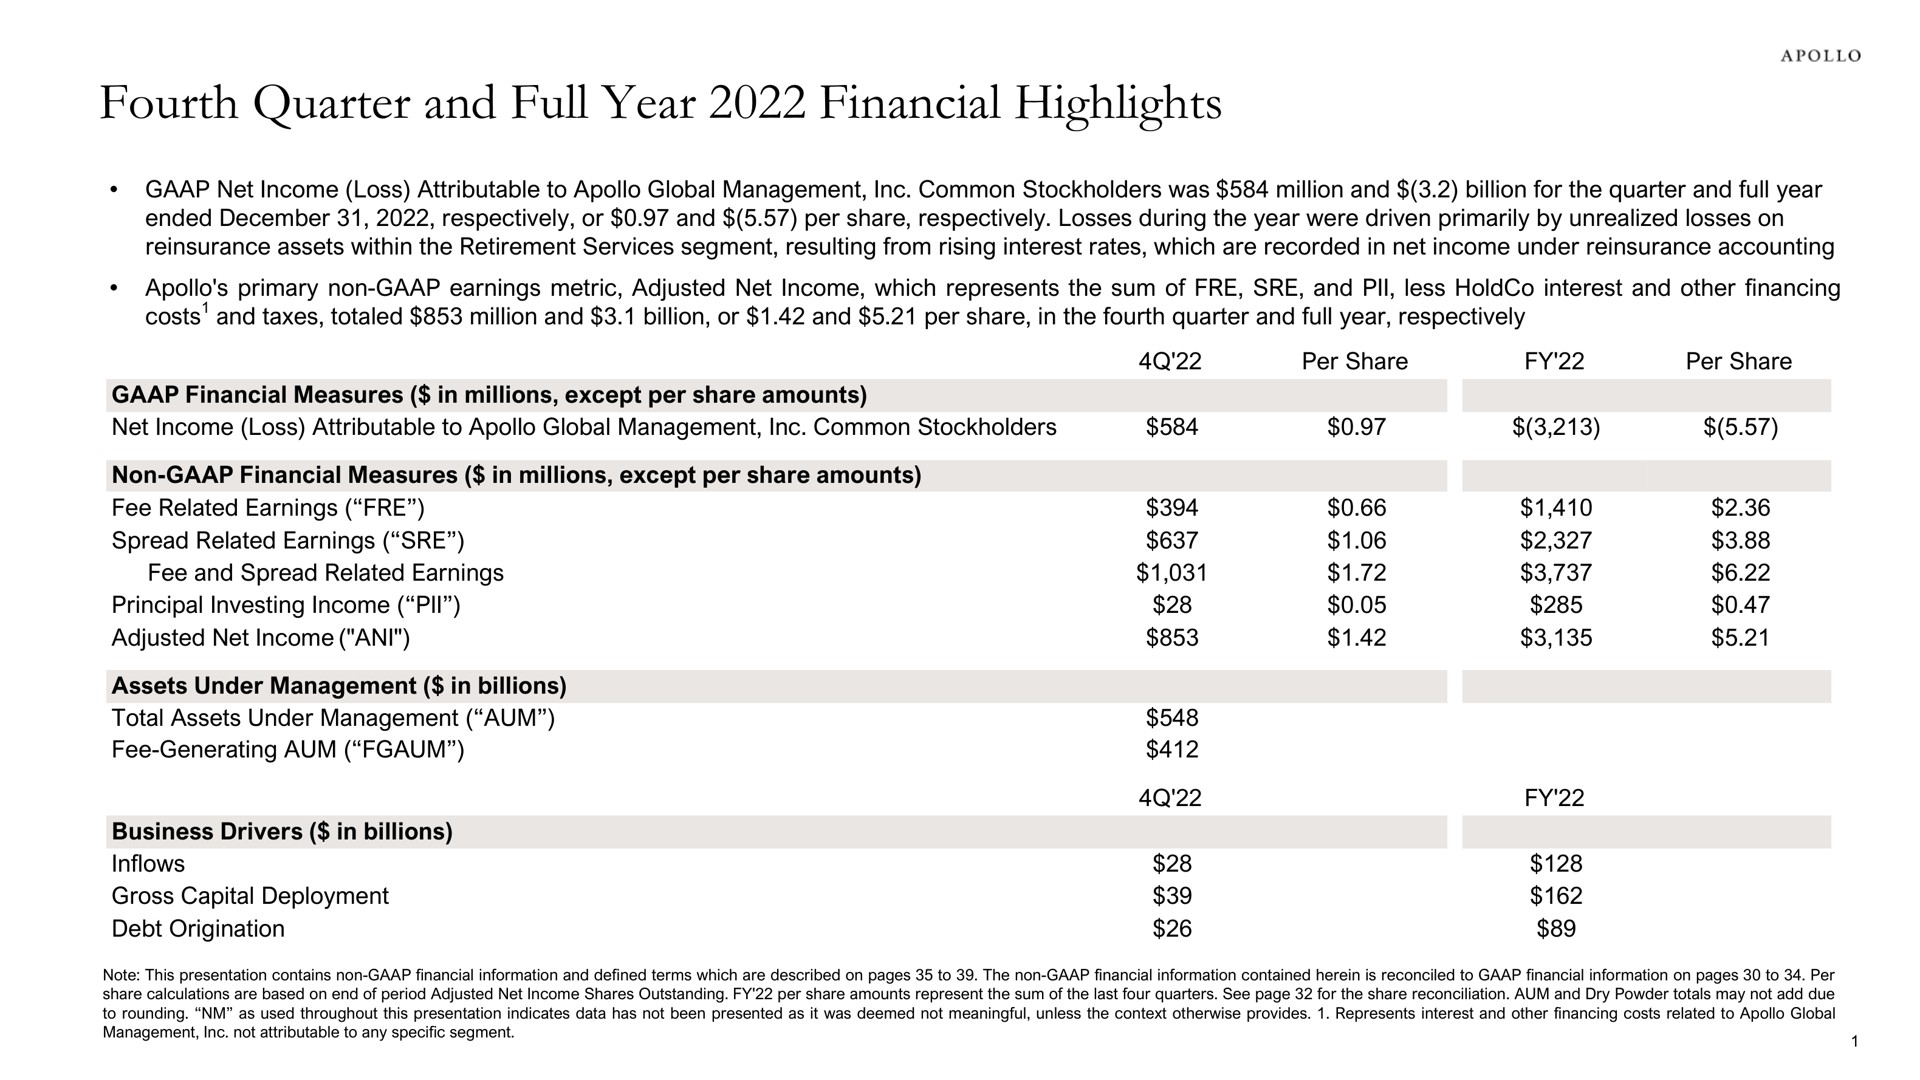 fourth quarter and full year financial highlights | Apollo Global Management